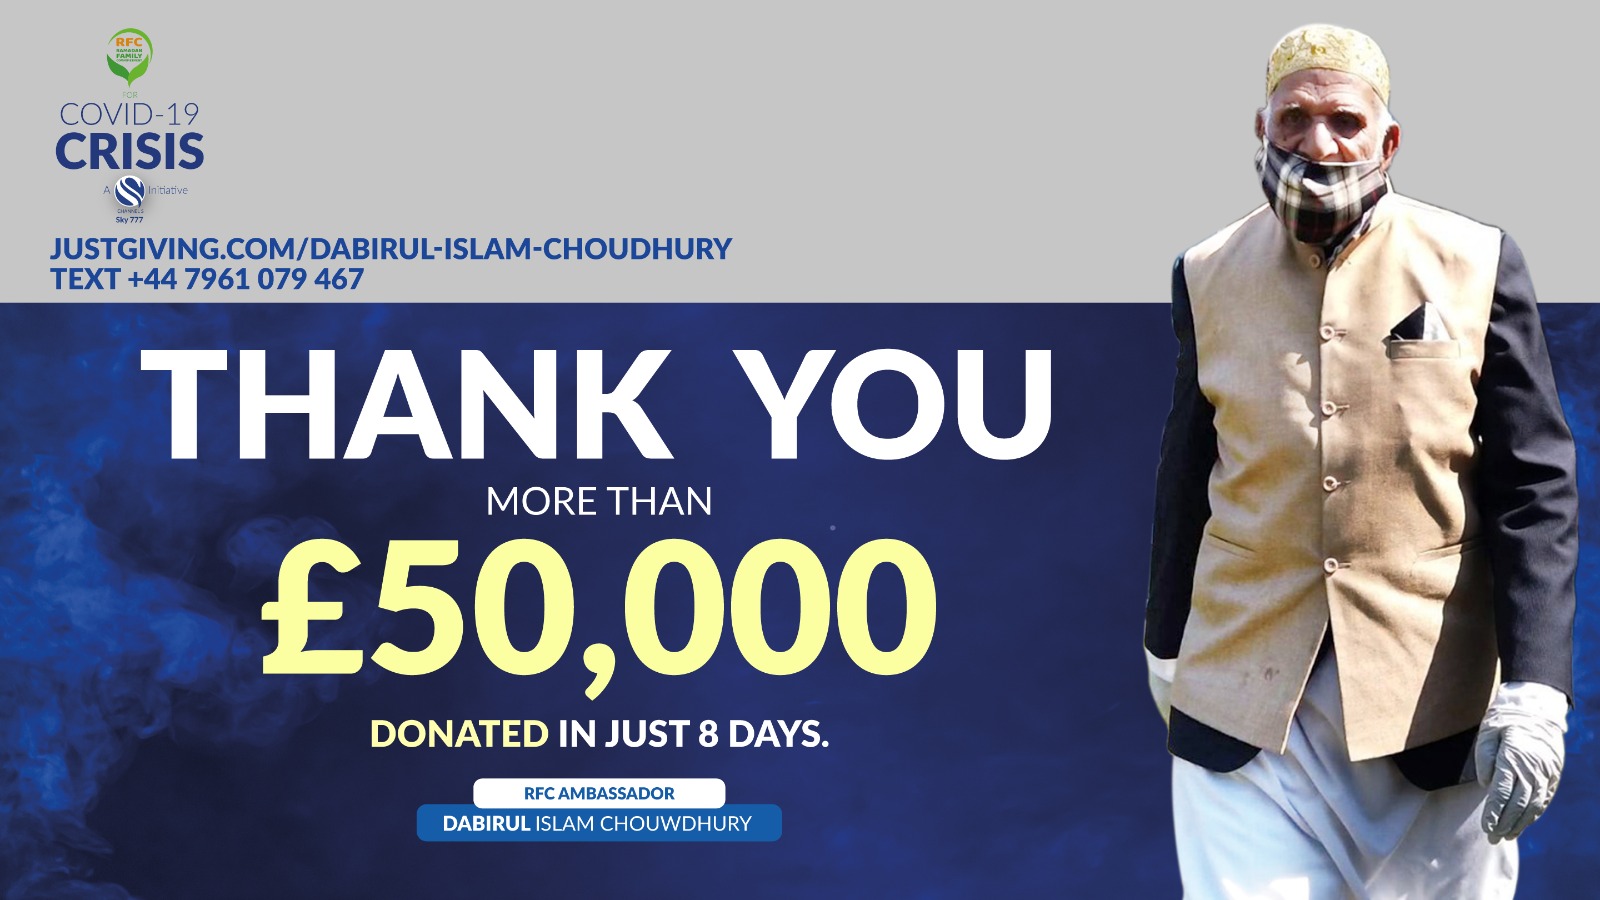 Mr Choudhury's JustGiving will be open for donations throughout the entire month of Ramadan.